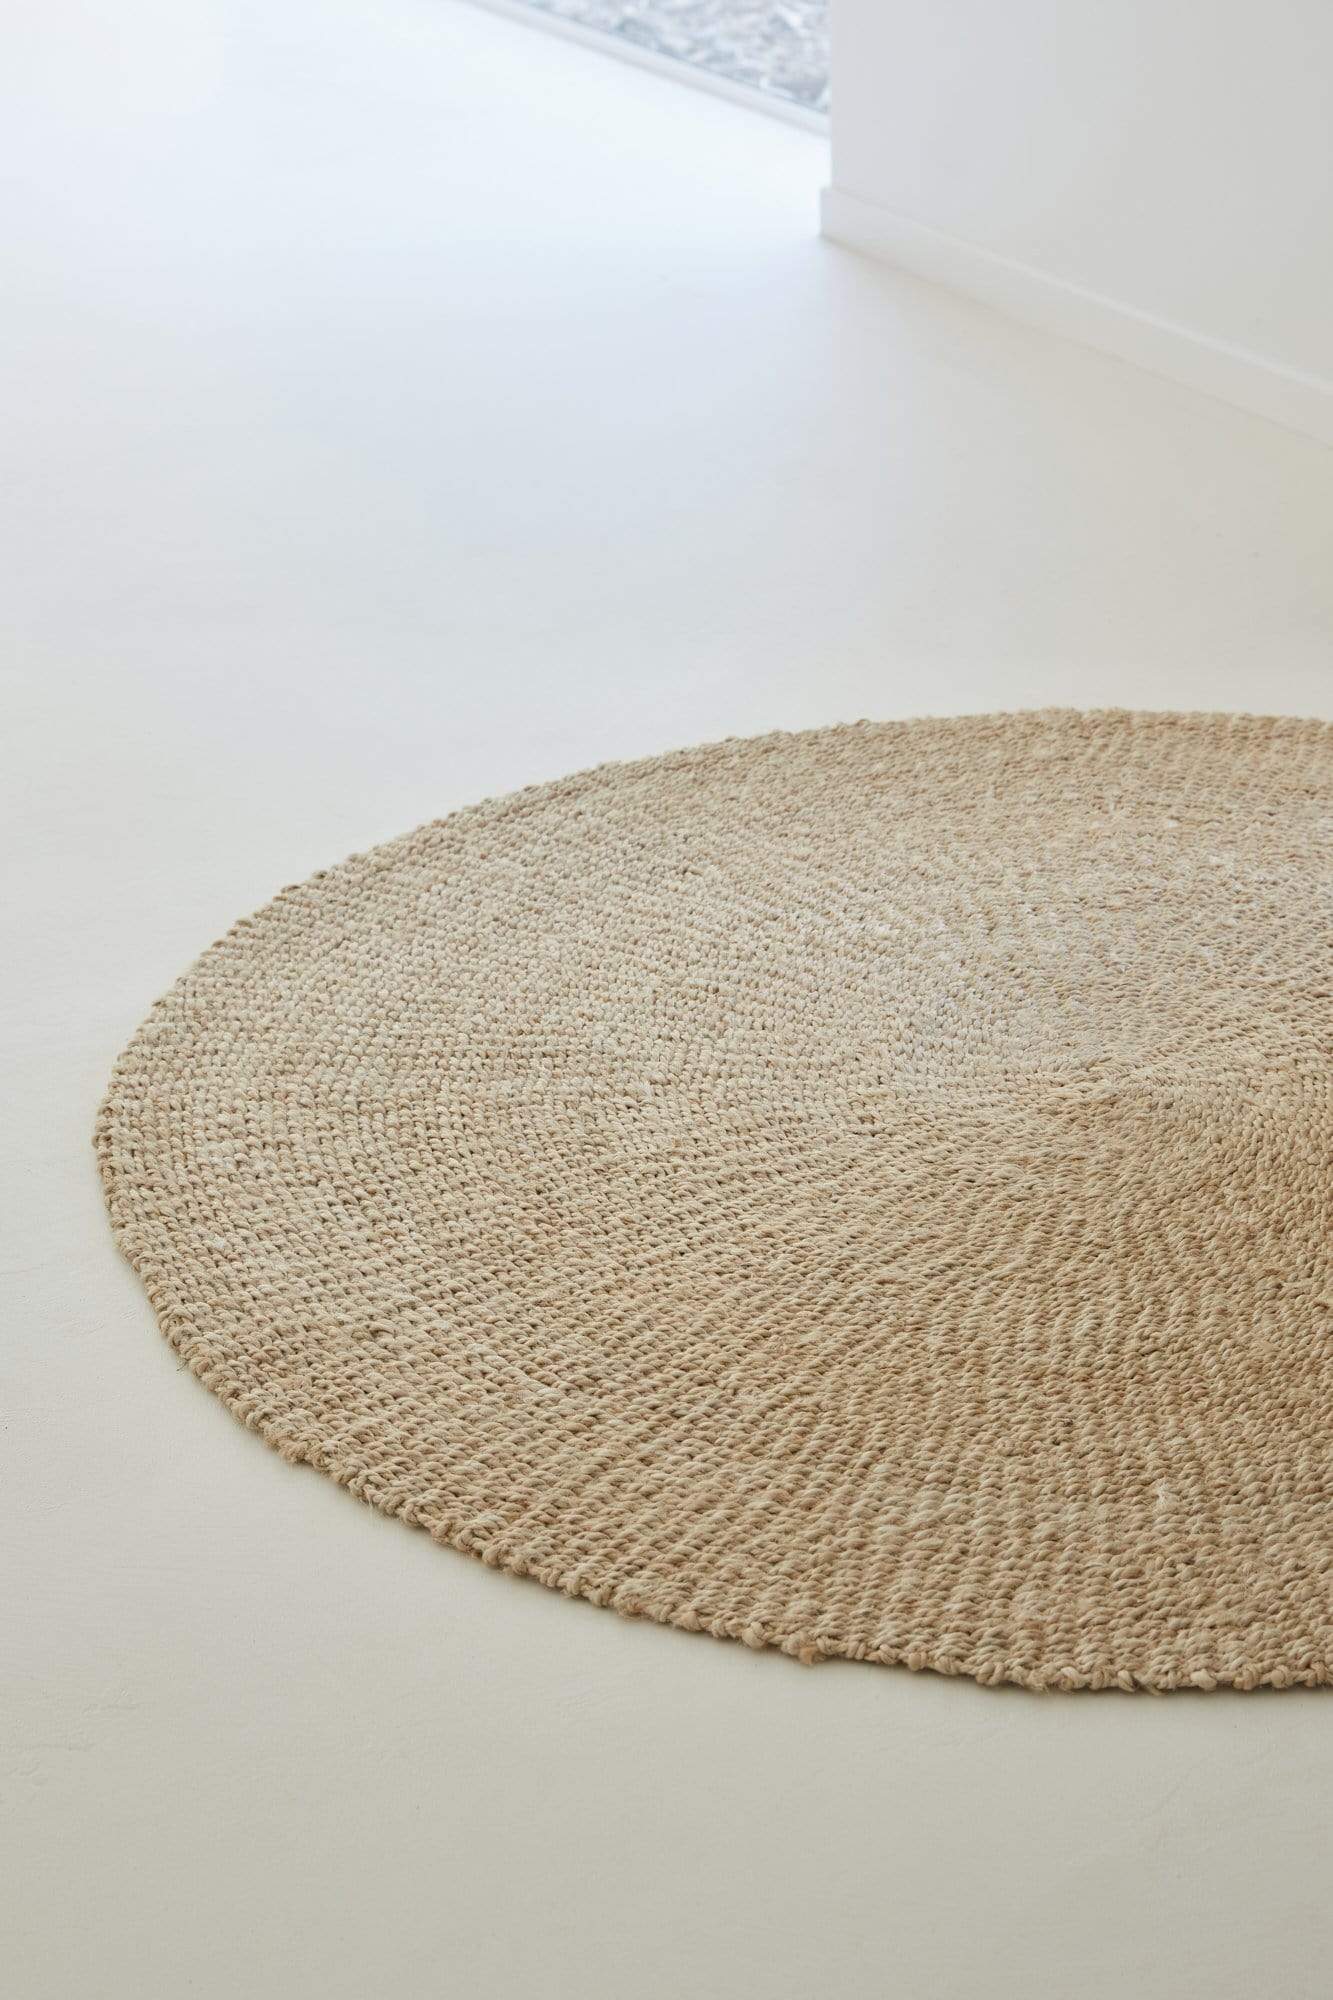 Large round woven natural jute rug in bedroom